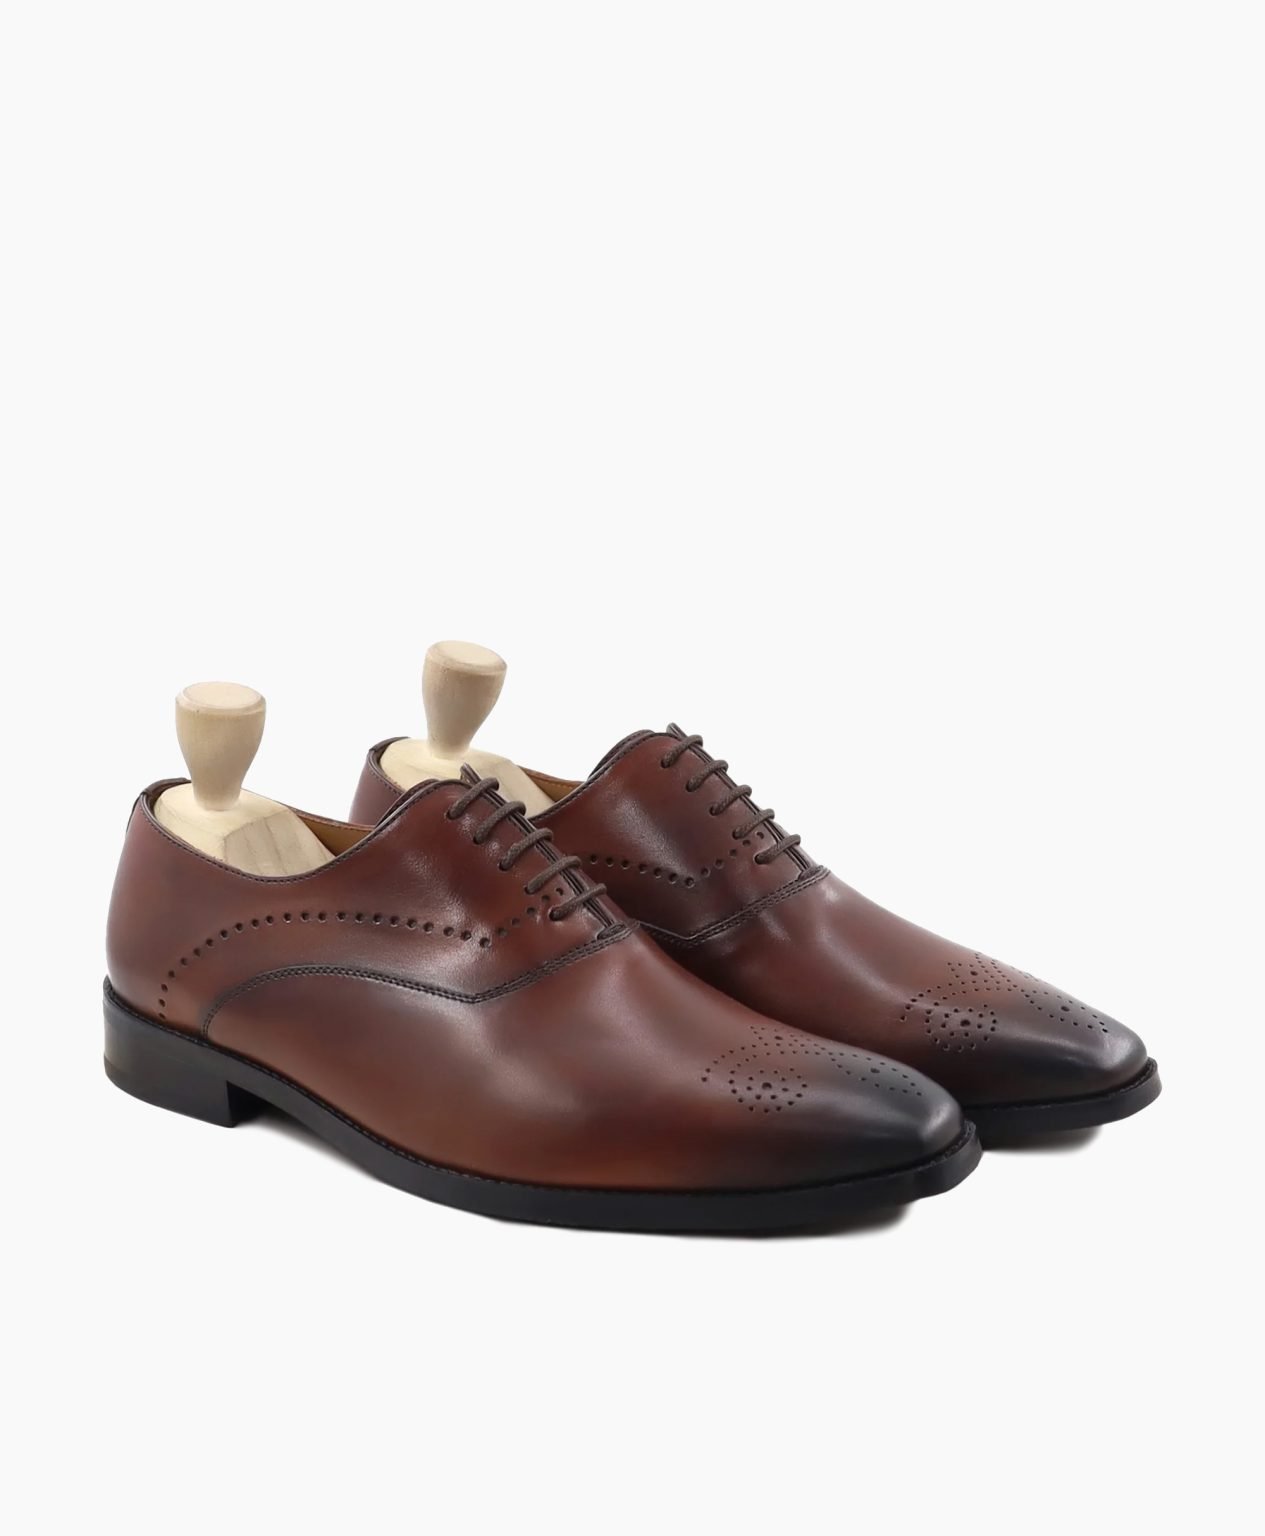 crewe-oxford-burnish-oxblood-leather-shoes-image200